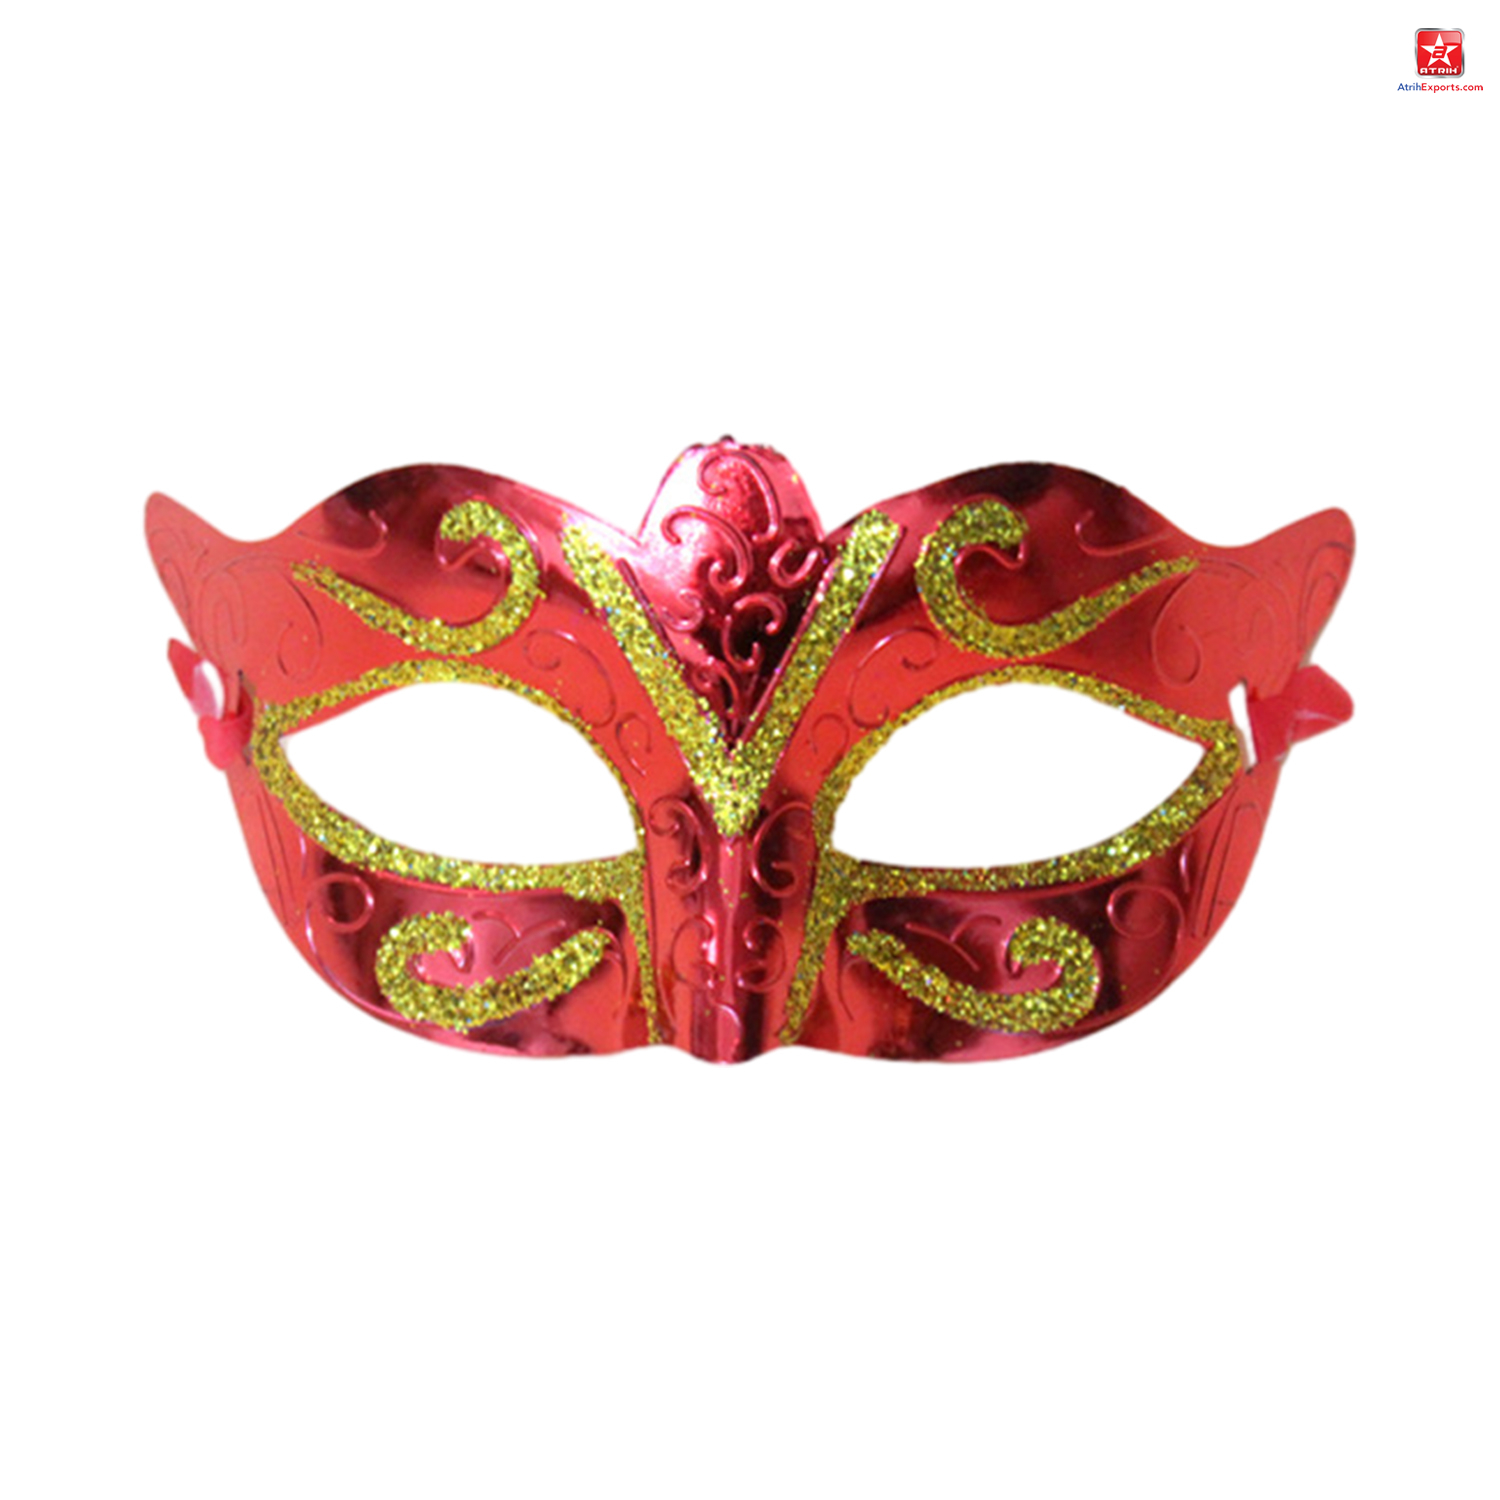 Cheap Price Festival Half Face mask Electroplated PP The Halloween Party Performs Masquerade mask